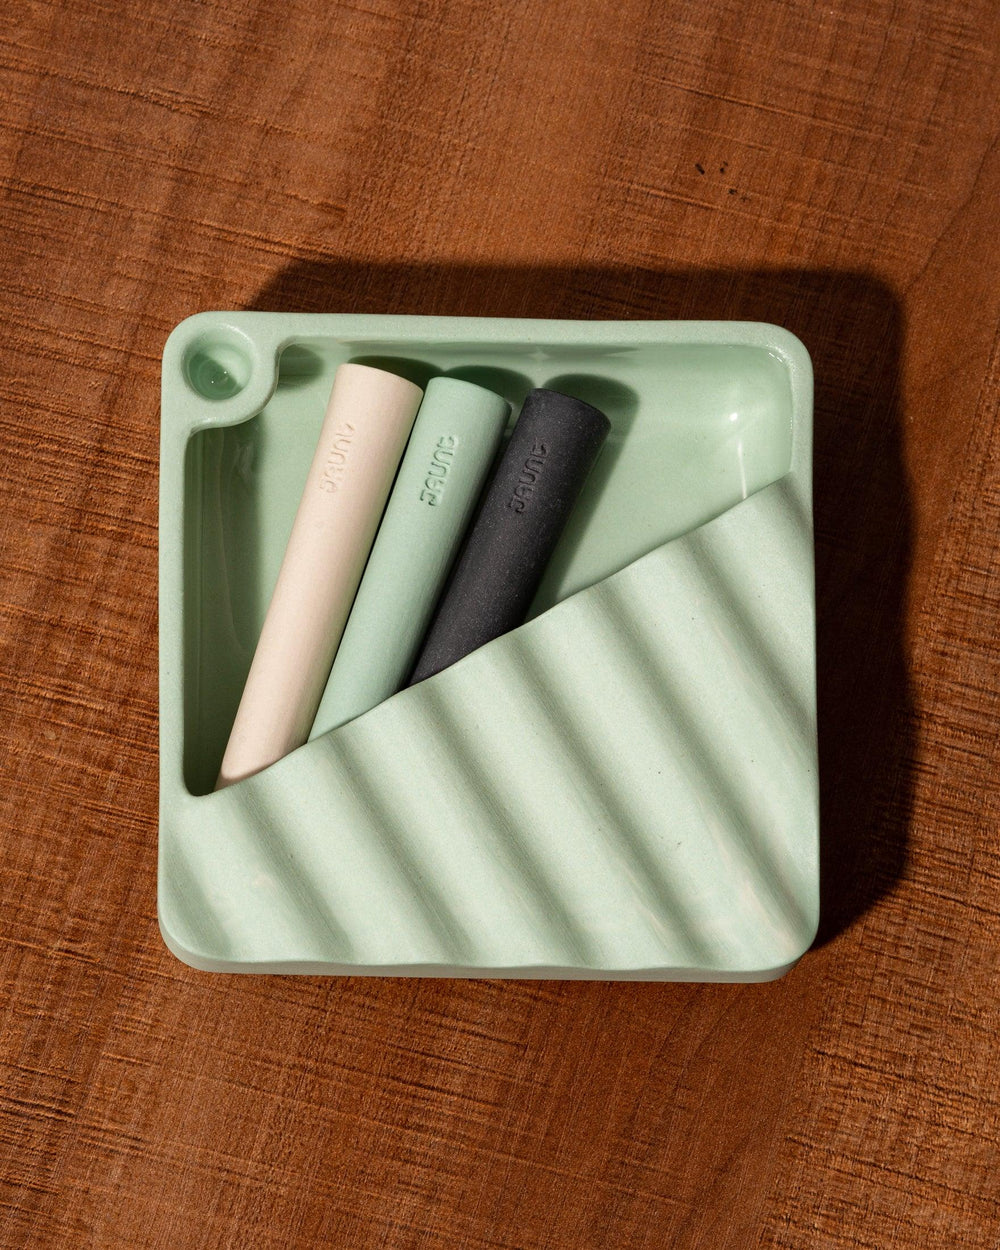 Ceramic one hitter pipes nested in a ceramic ashtray.